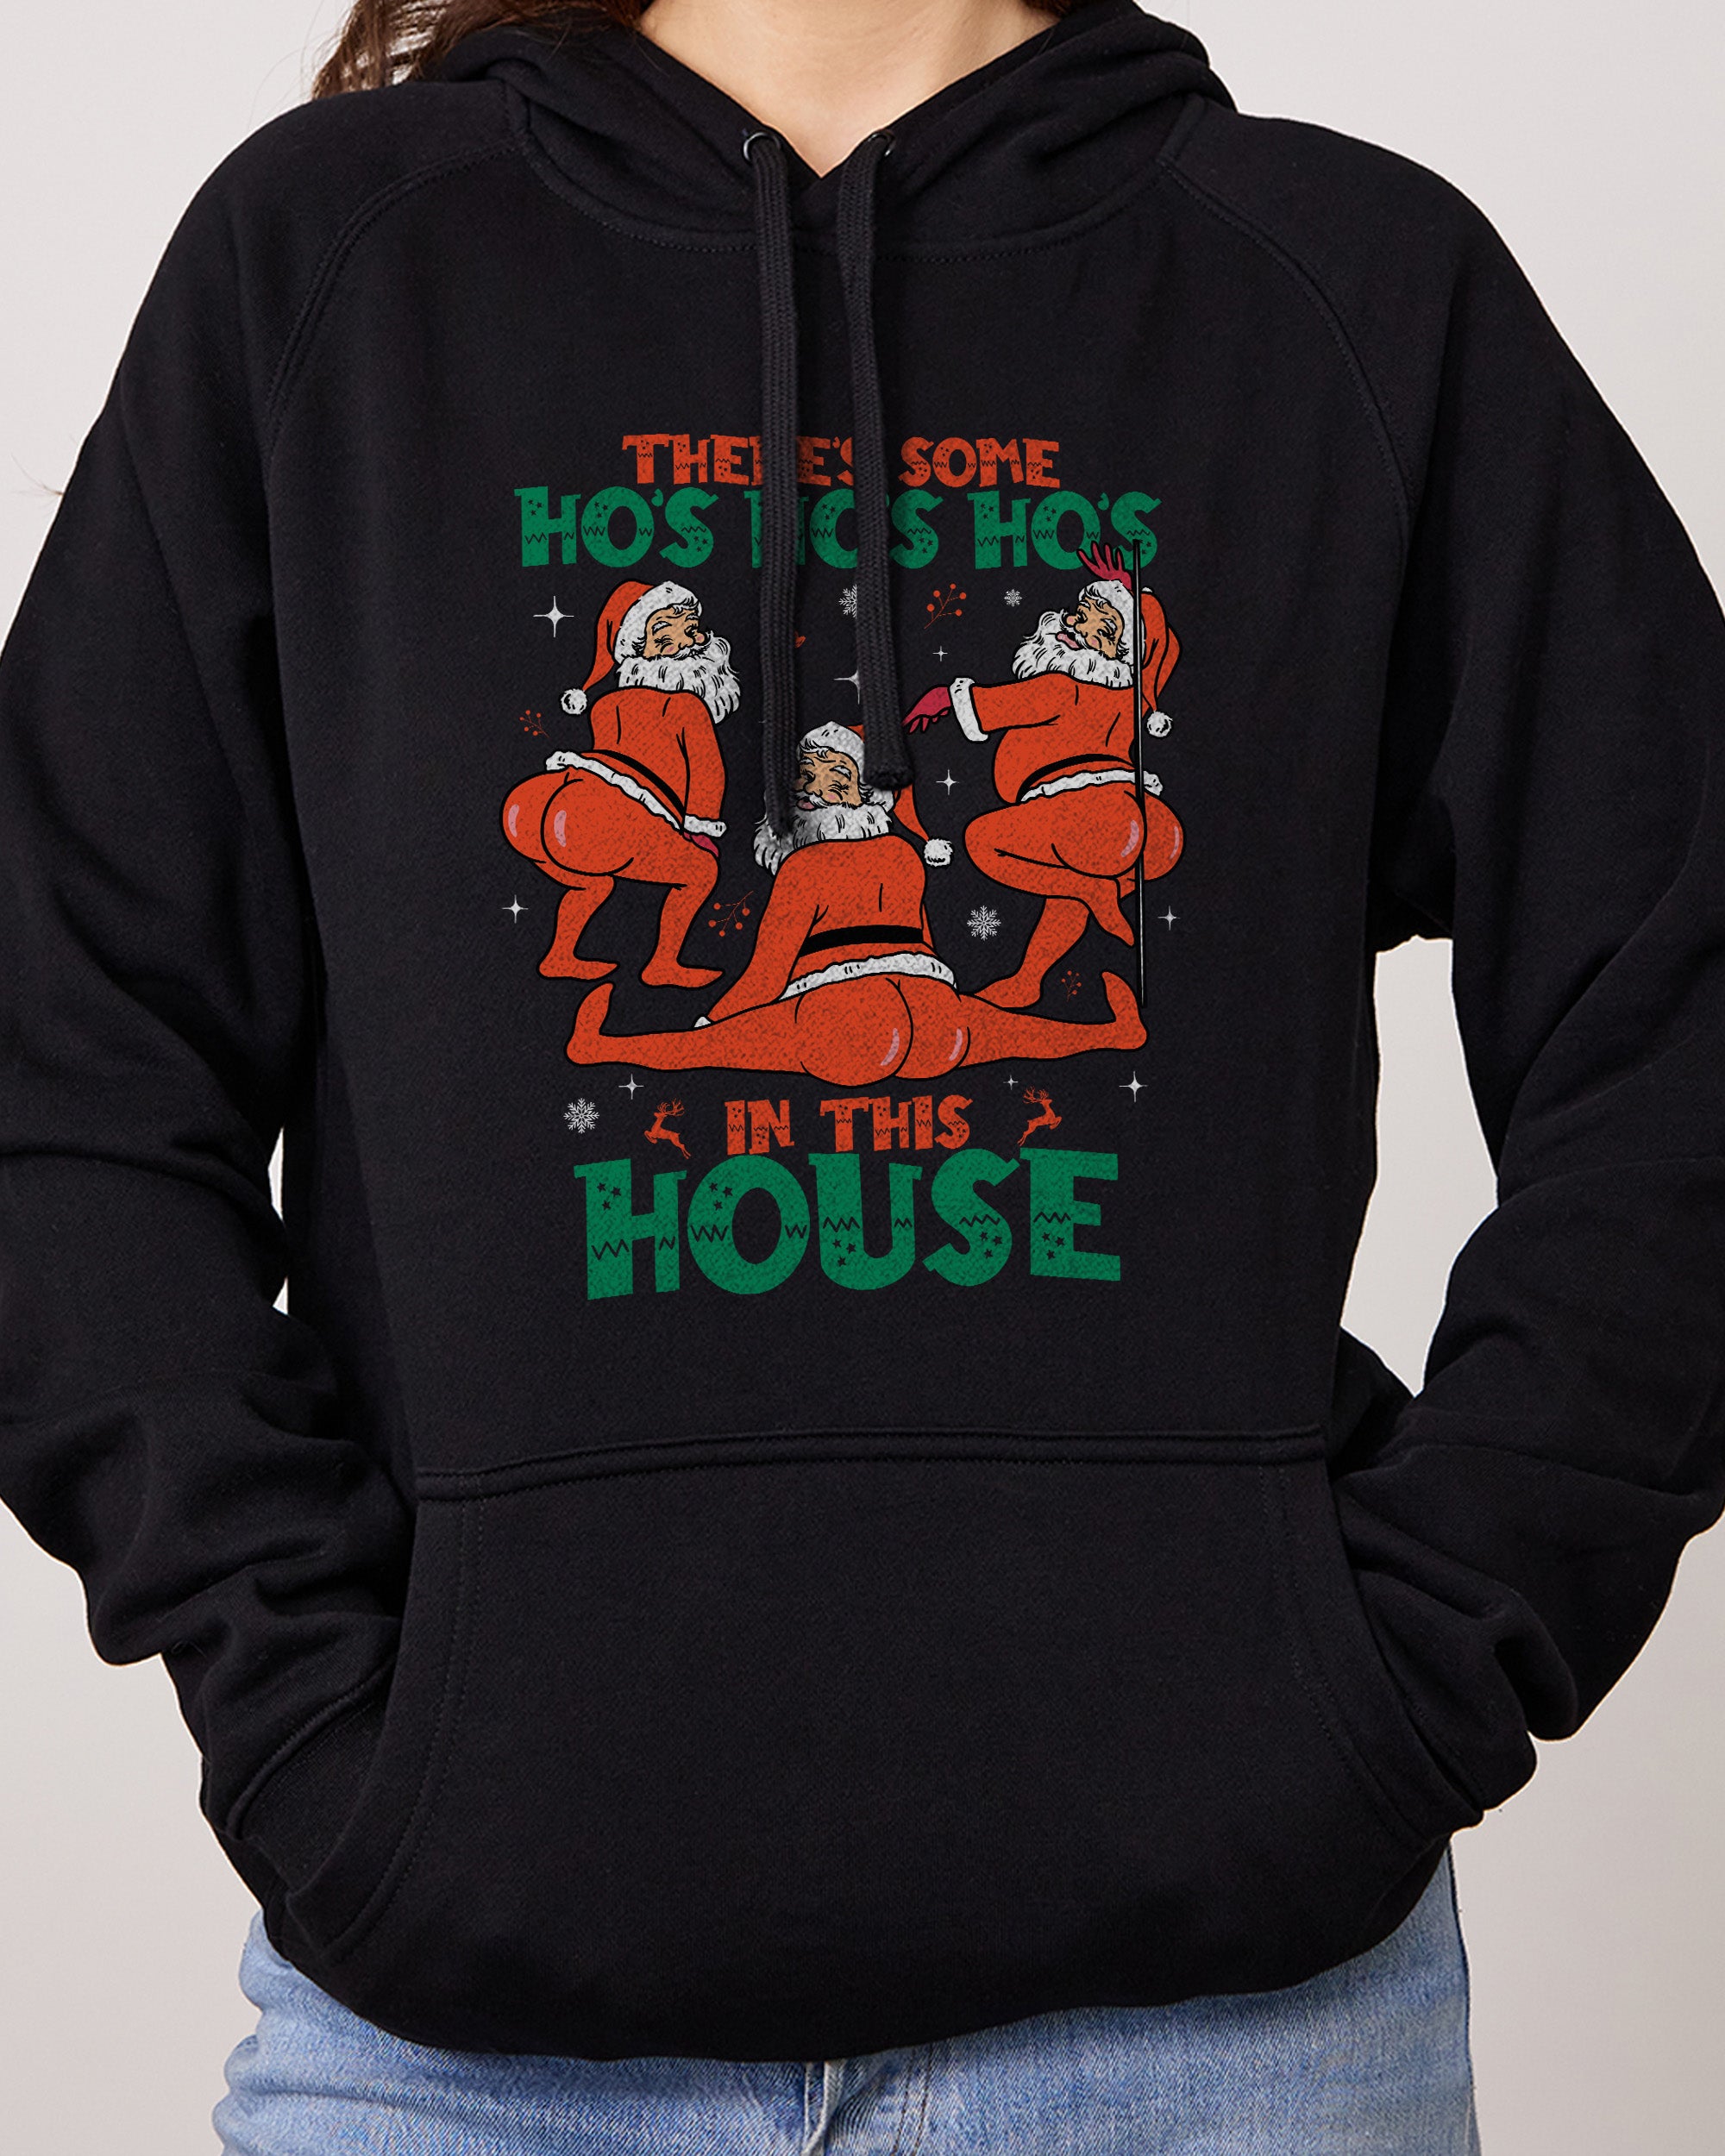 There's Some Ho's Ho's Ho's in This House Hoodie Europe Online Black